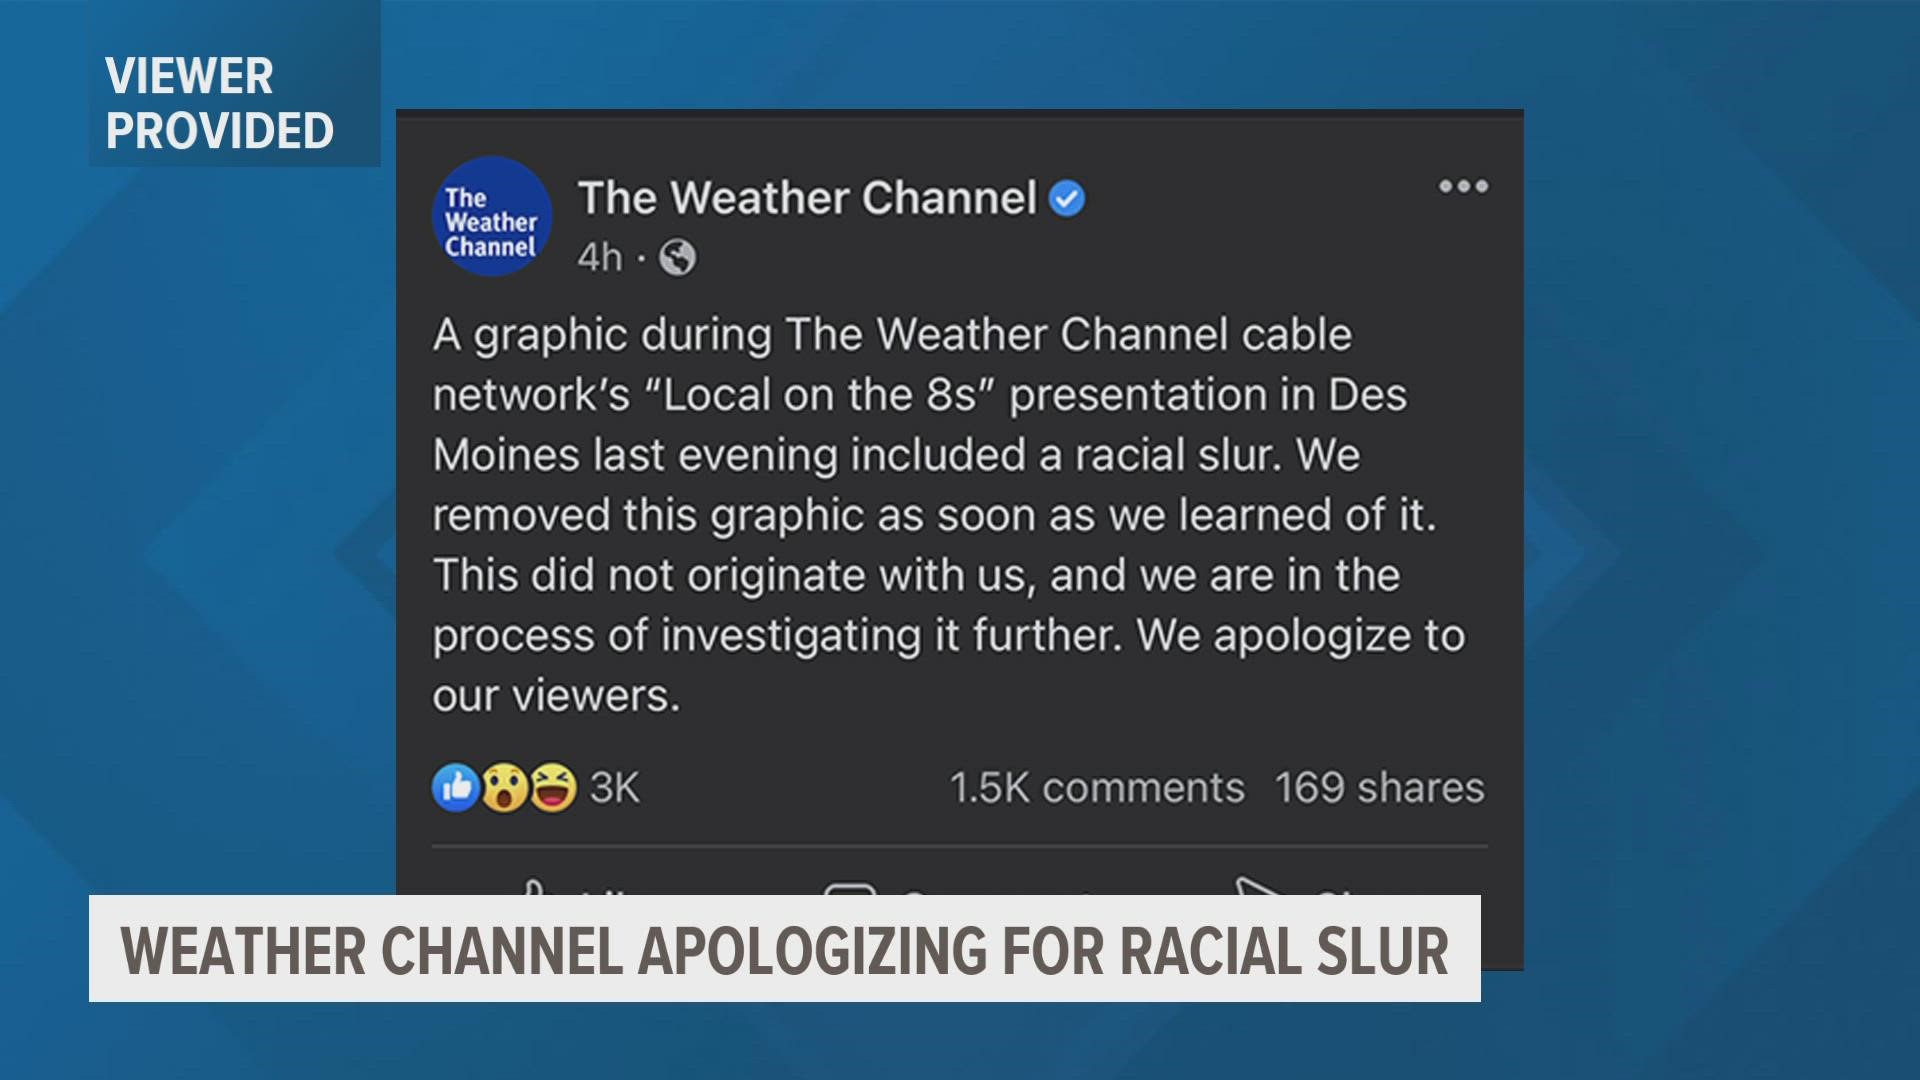 Racial slur displayed on The Weather Channel in Des Moines 